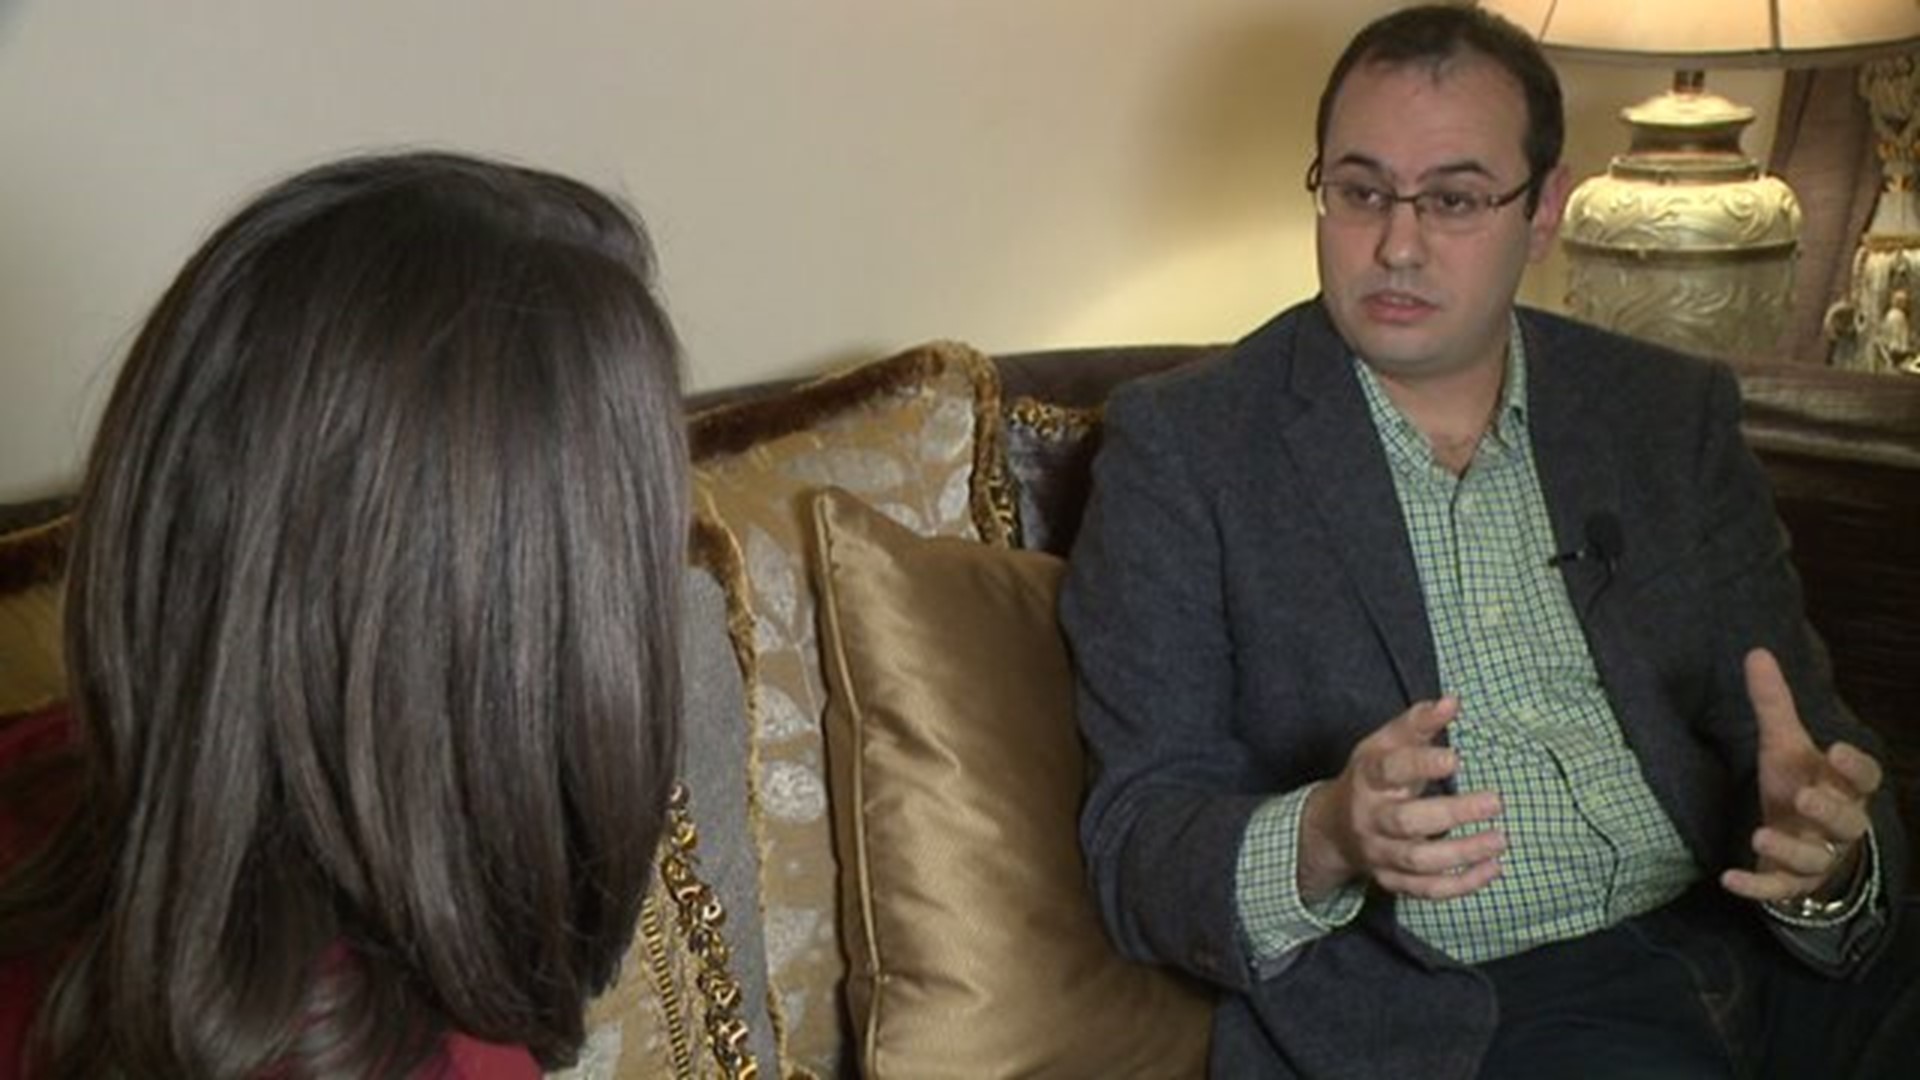 Local Syrian doctor reacts to ban on refugees